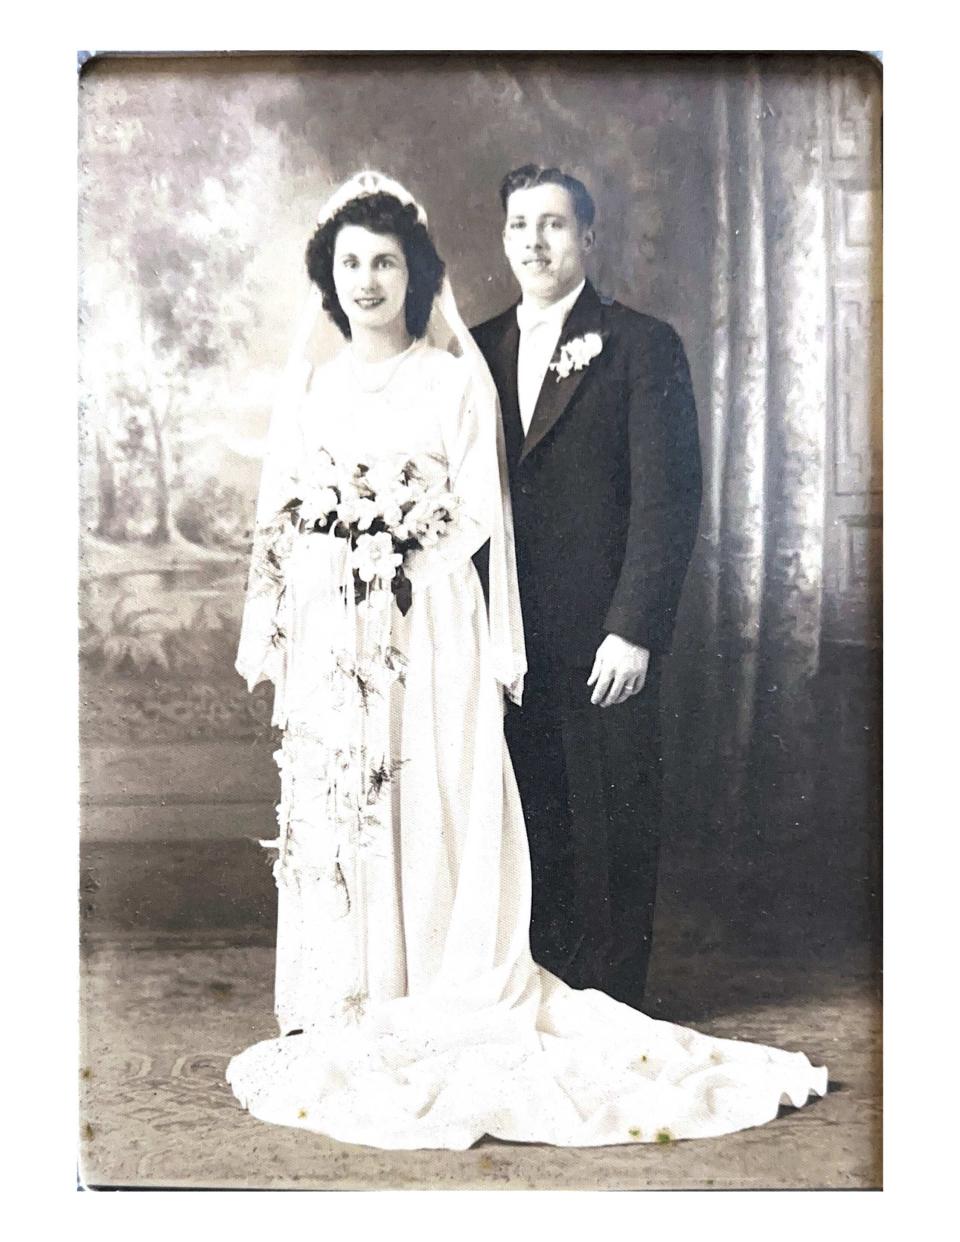 Alice and Edward J. Perry of Taunton were married on, April 12, 1947. Alice turns 100 on April 8, 2024.